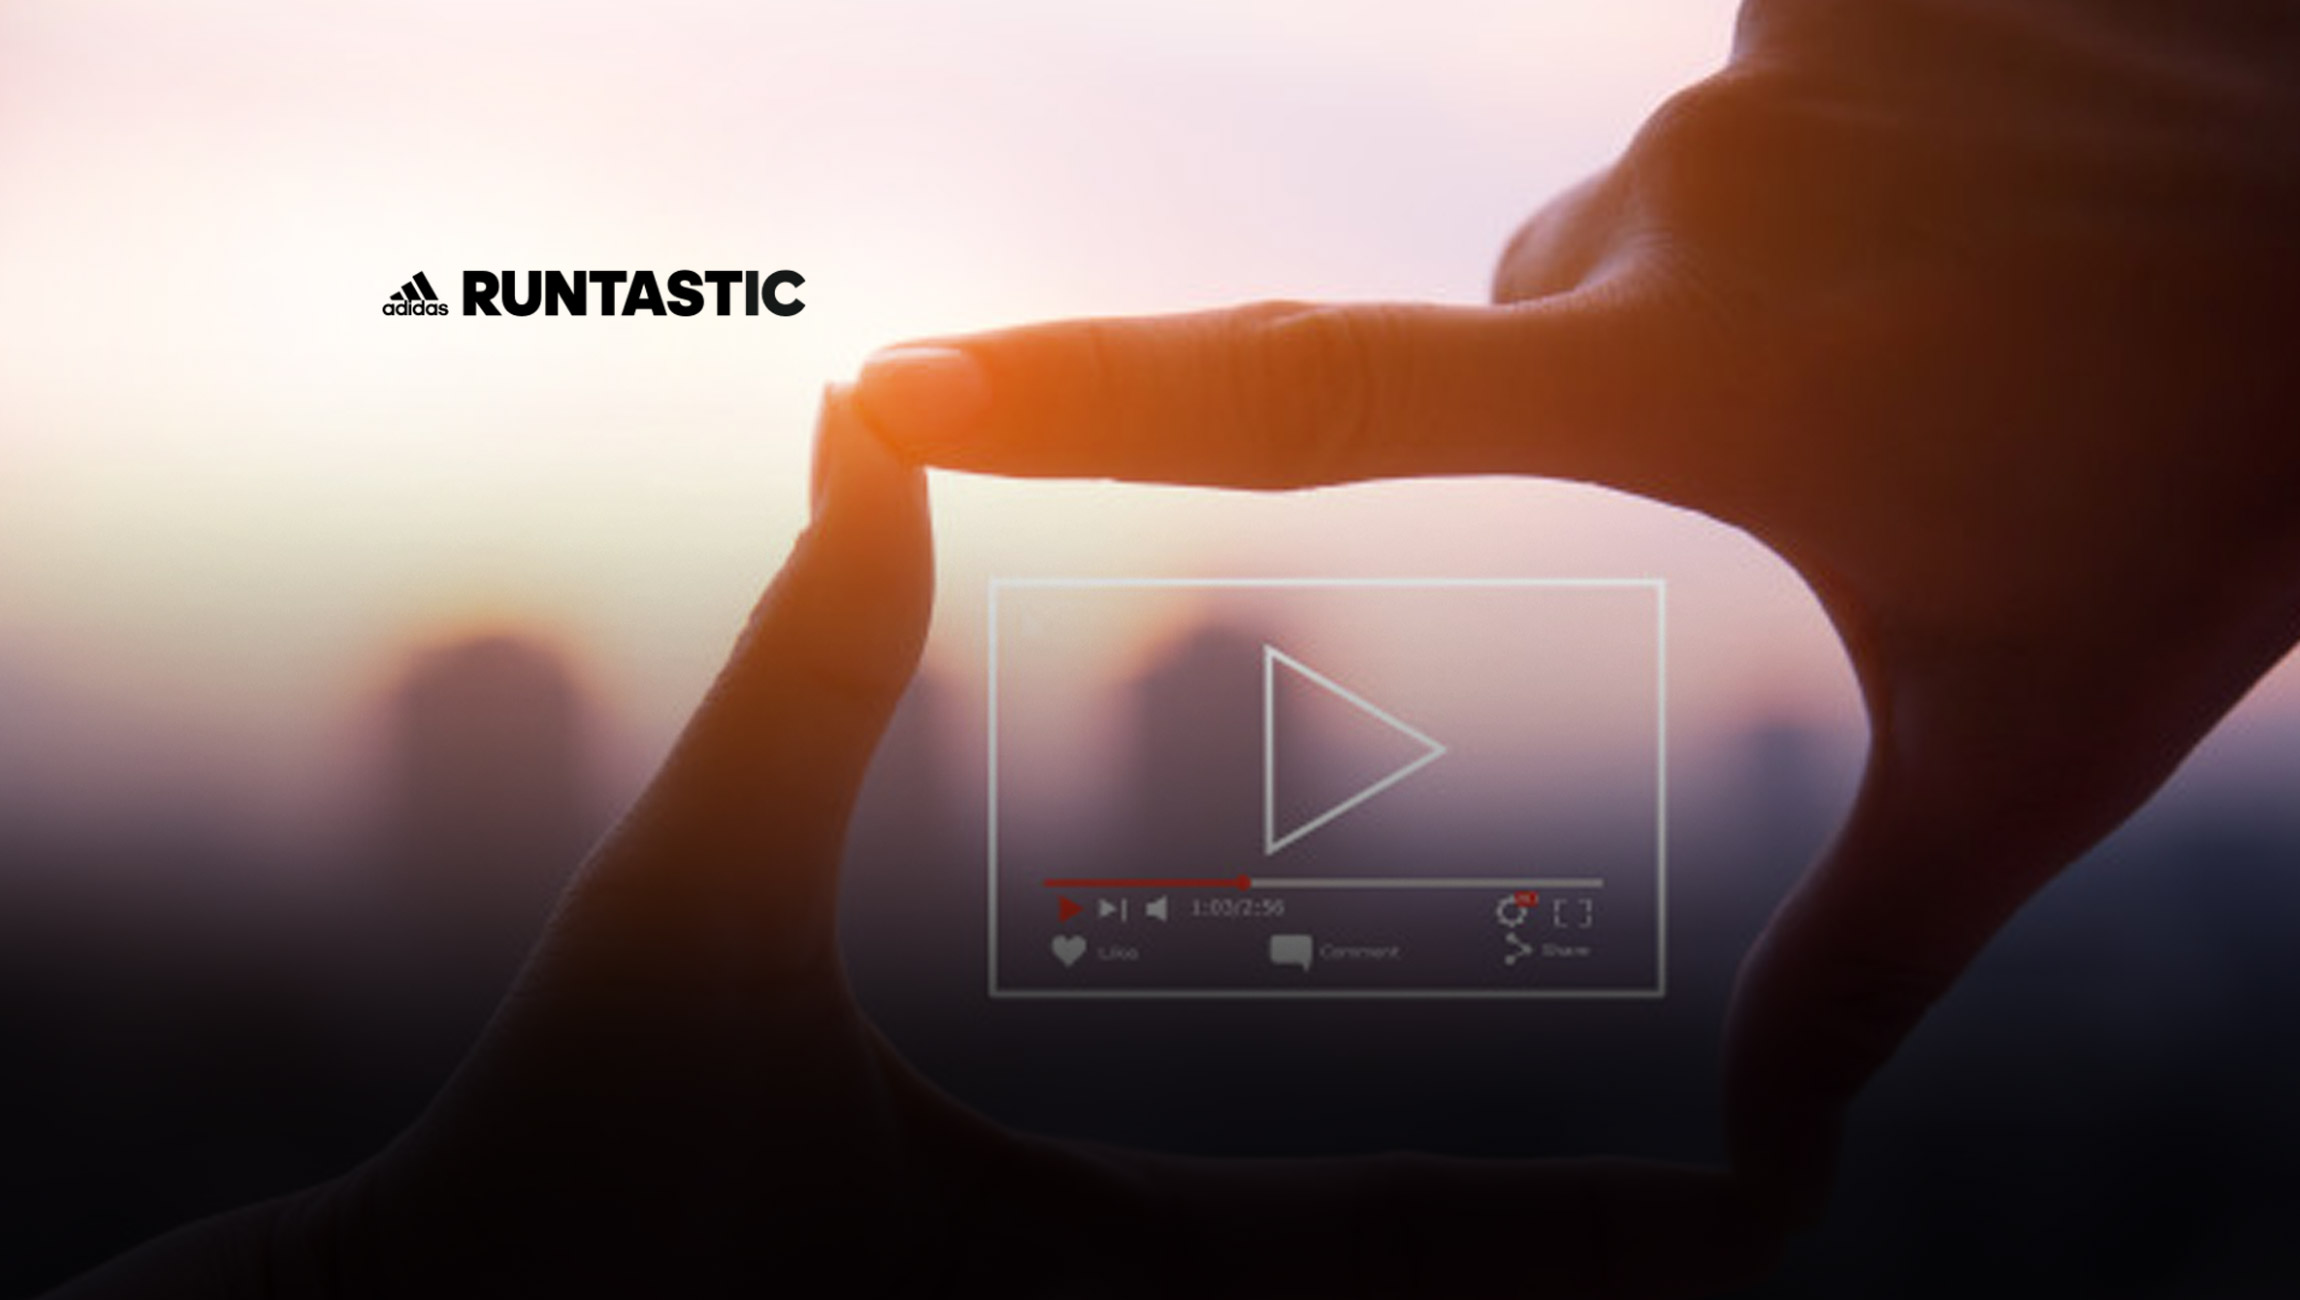 adidas Runtastic Selects IPV to Support its Studio Video Team's Move to Hybrid Working